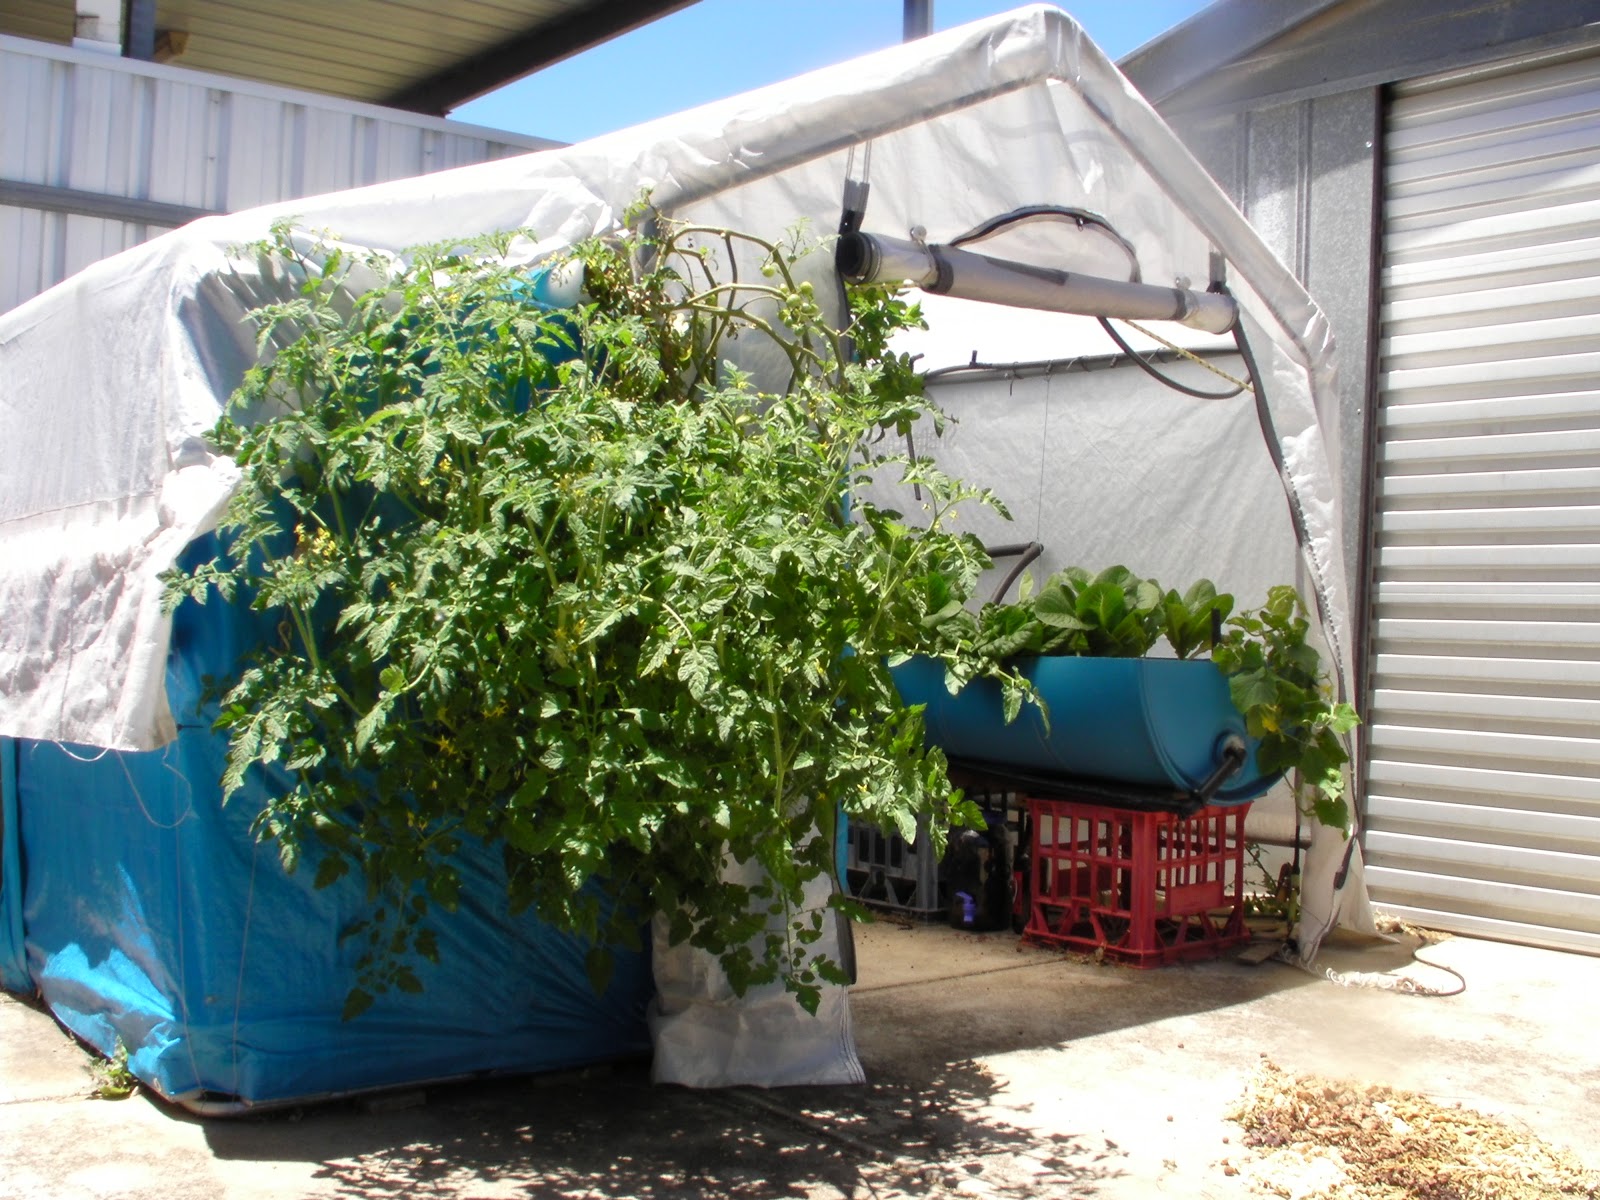 ... things in 20 years: Aquaponics - External Tomato growing in fishtank